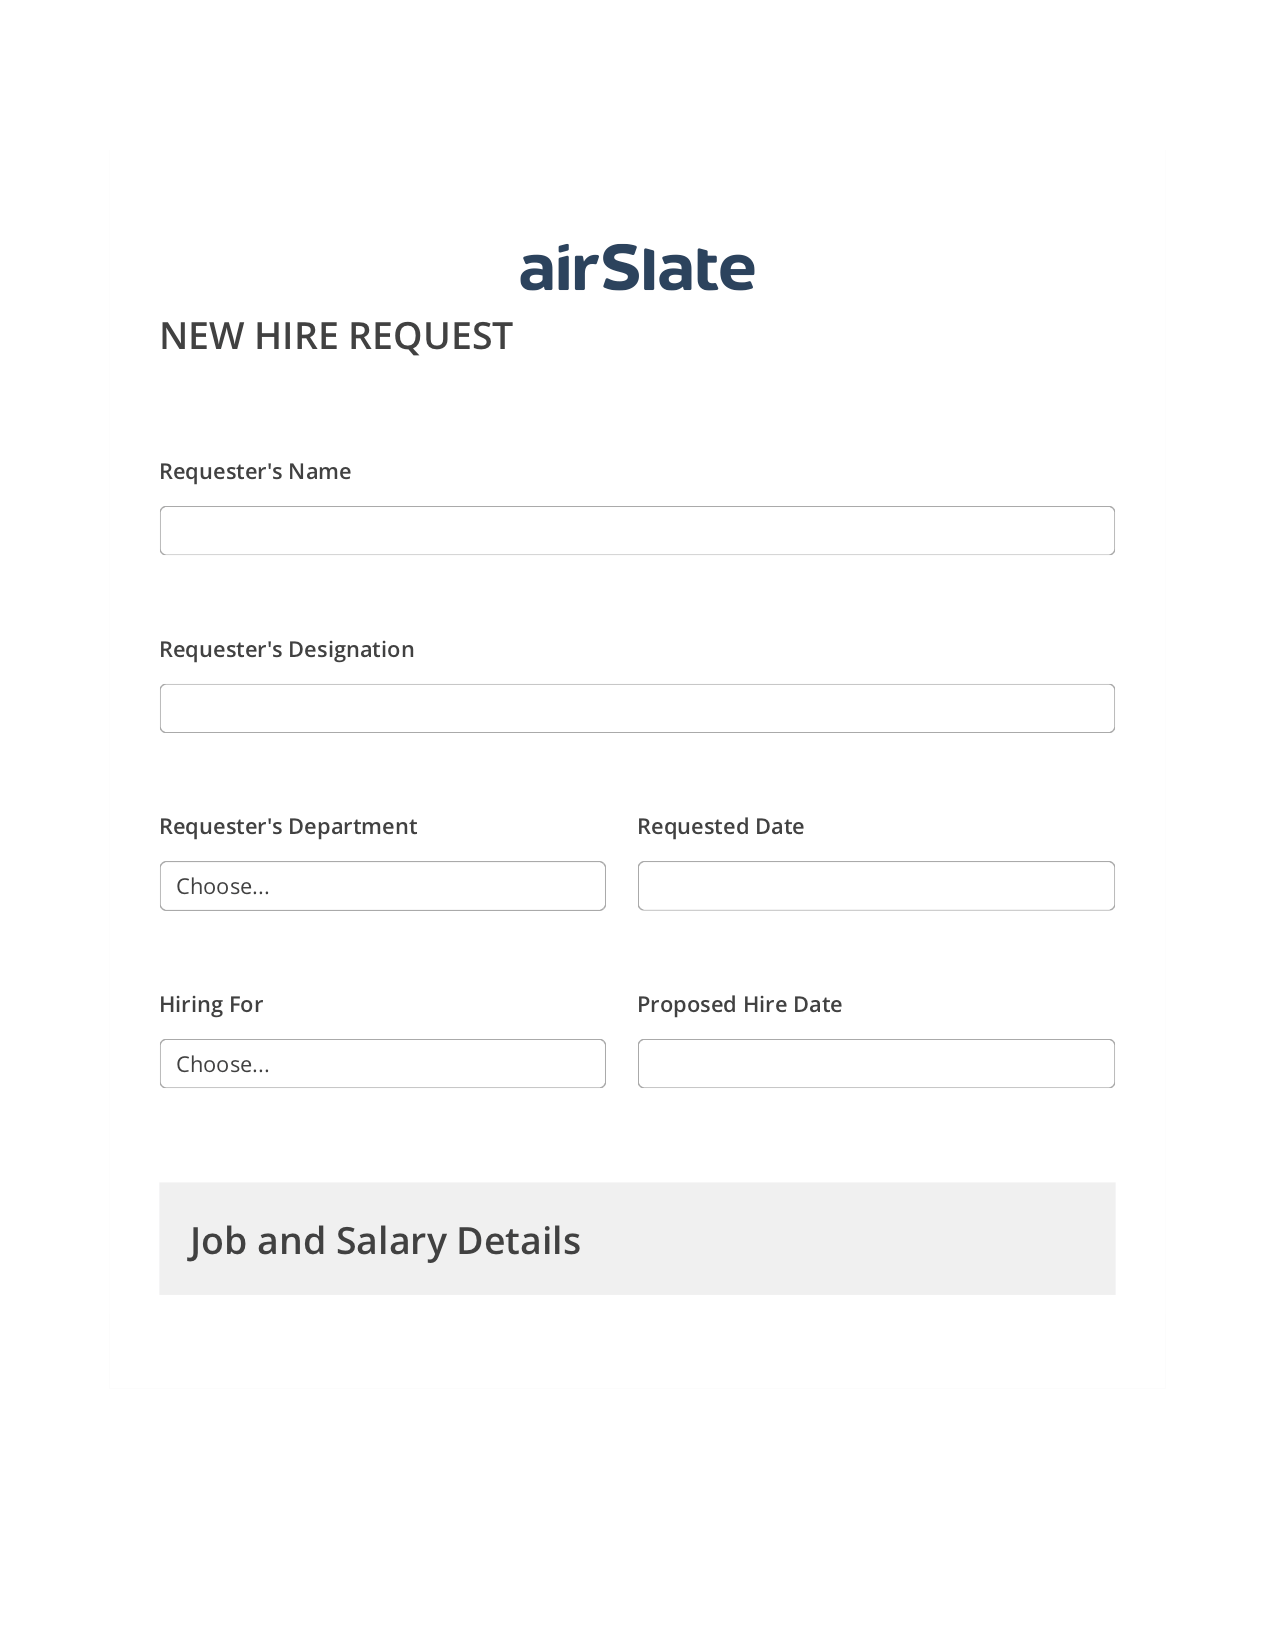 Hiring Request Workflow Pre-fill Dropdowns from Airtable, Text Message Notification Bot, Archive to SharePoint Folder Bot